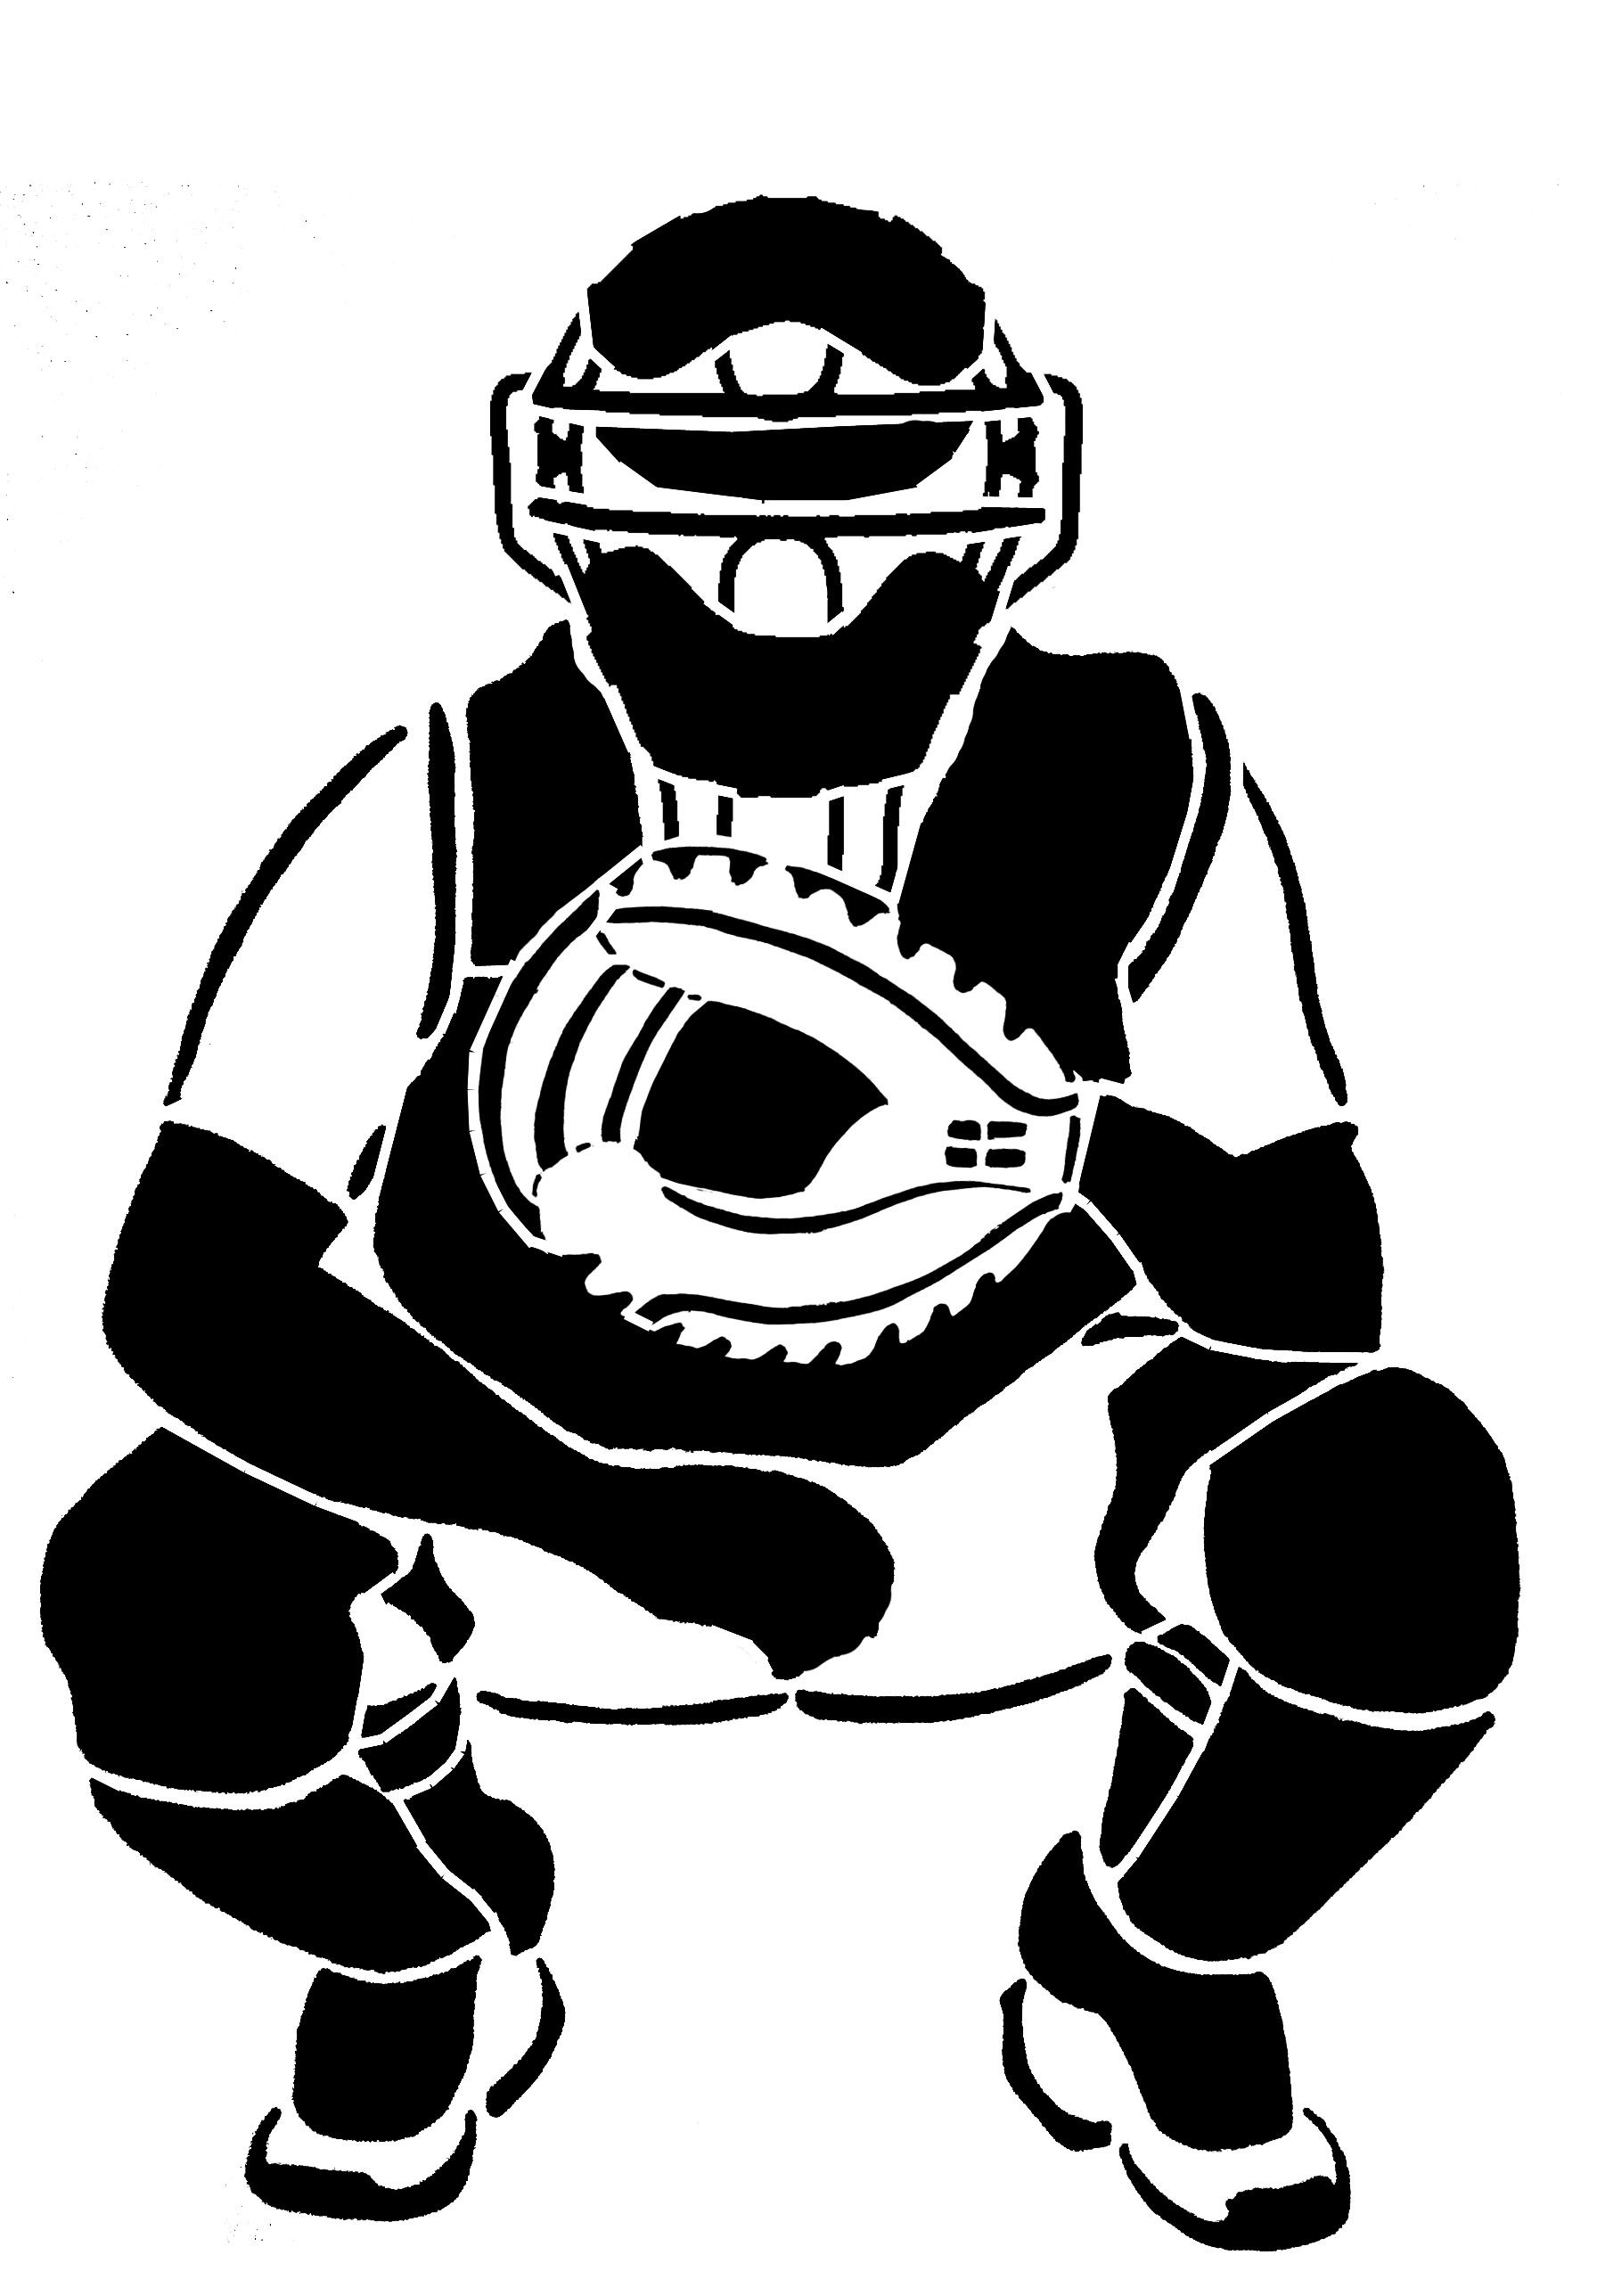 Baseball Catcher Drawing at GetDrawings Free download